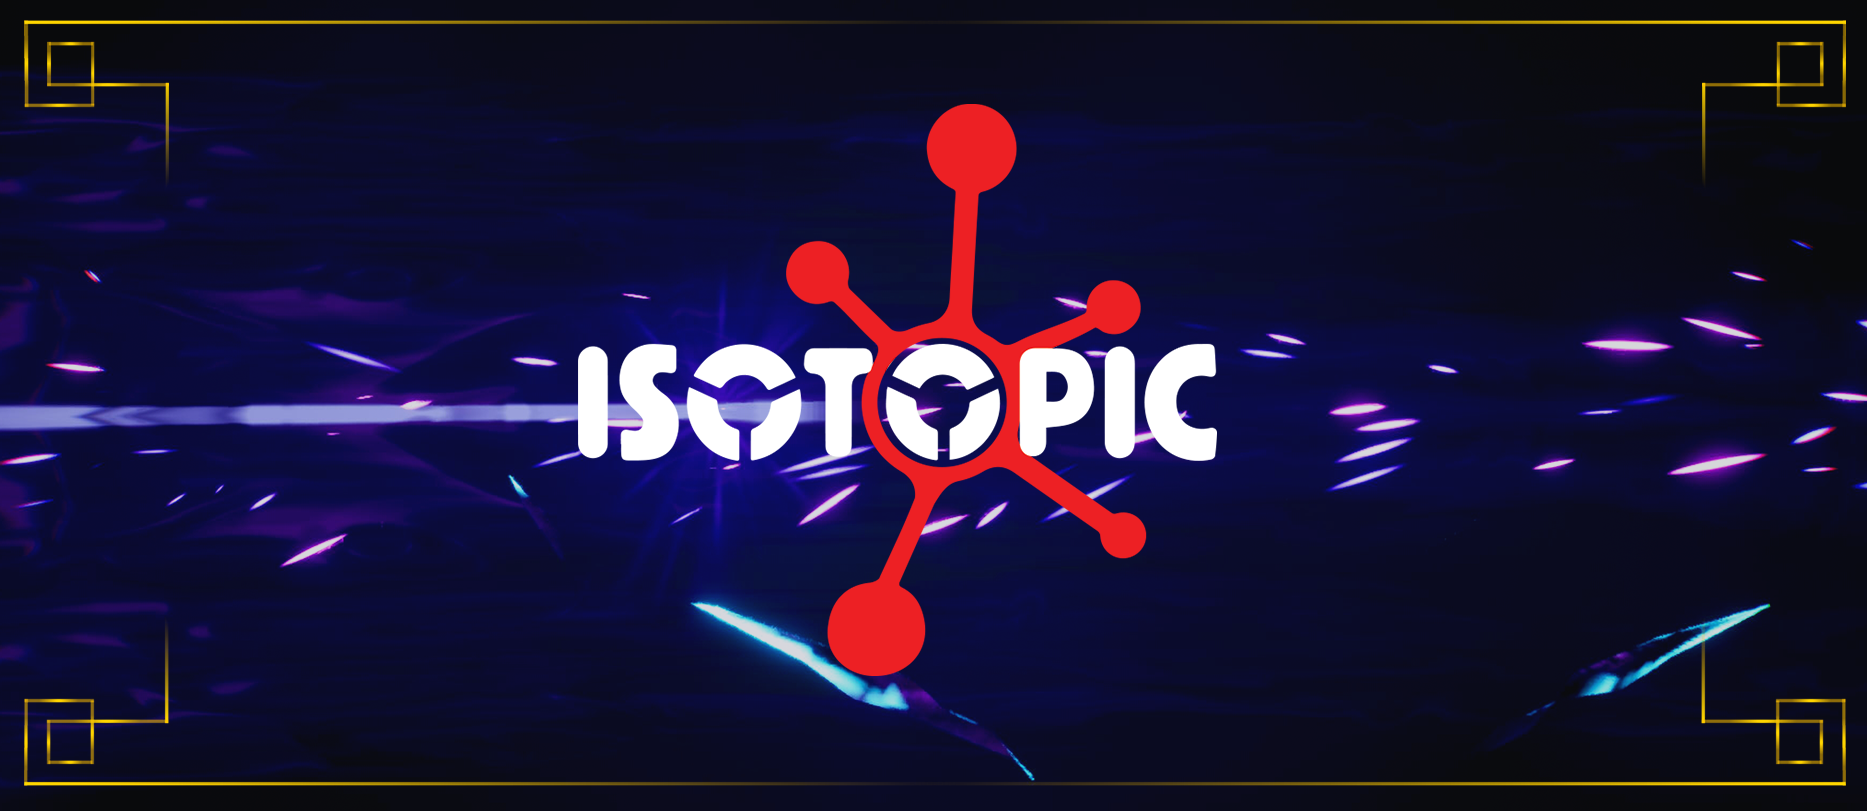 Discover a New Frontier for Gaming: Our Game Now Available on Isotopic Games Store!